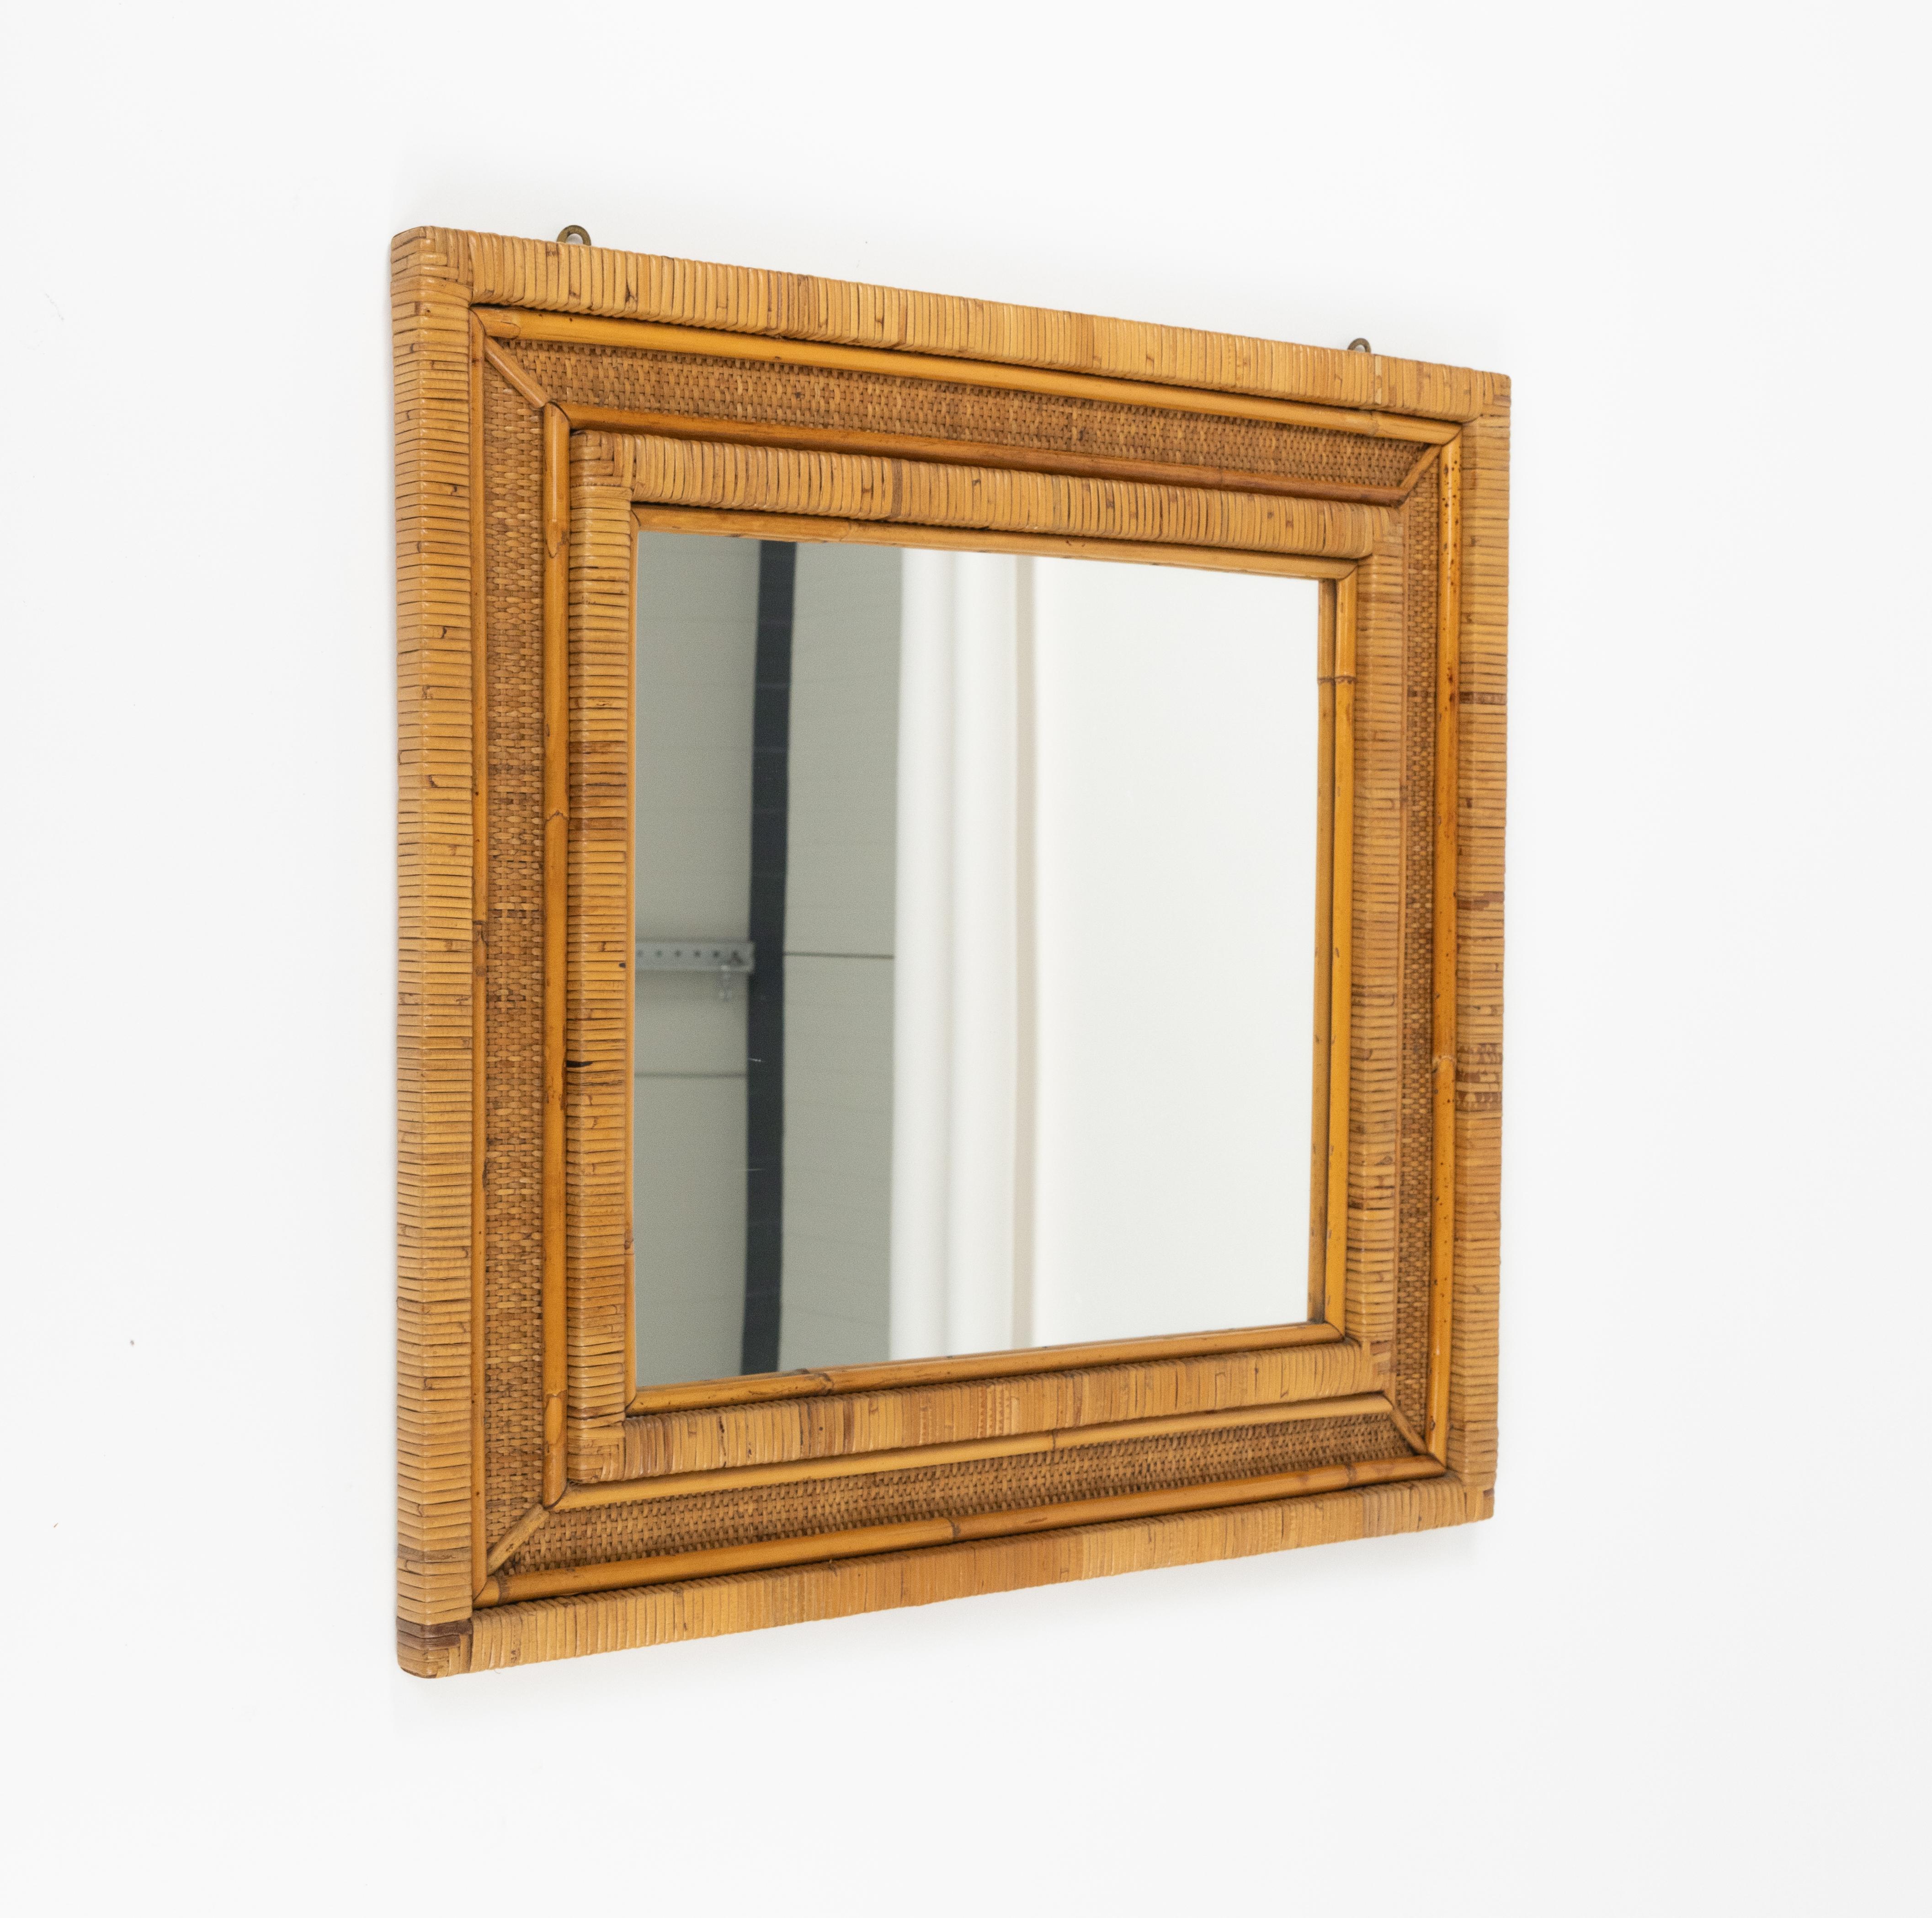 Midcentury Rattan and Wicker Wall Mirror, Italy 1970s In Good Condition For Sale In Rome, IT